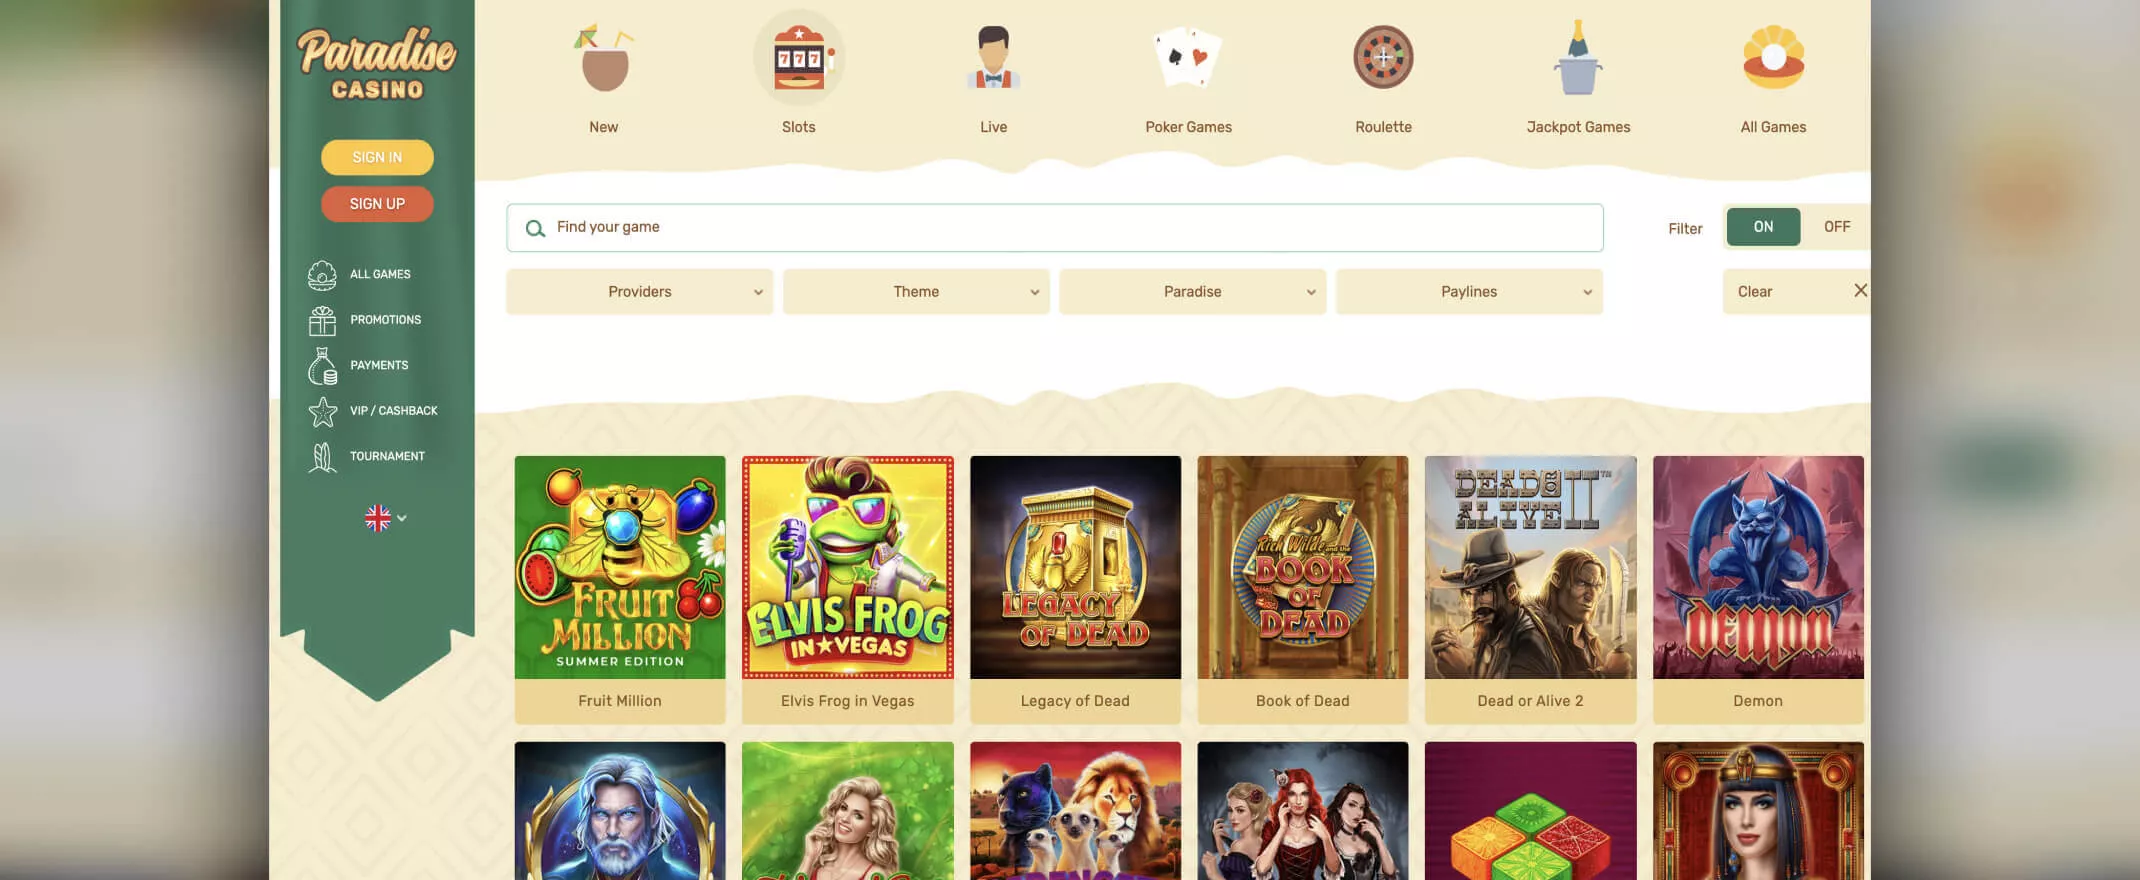 Paradise screenshot of the games page